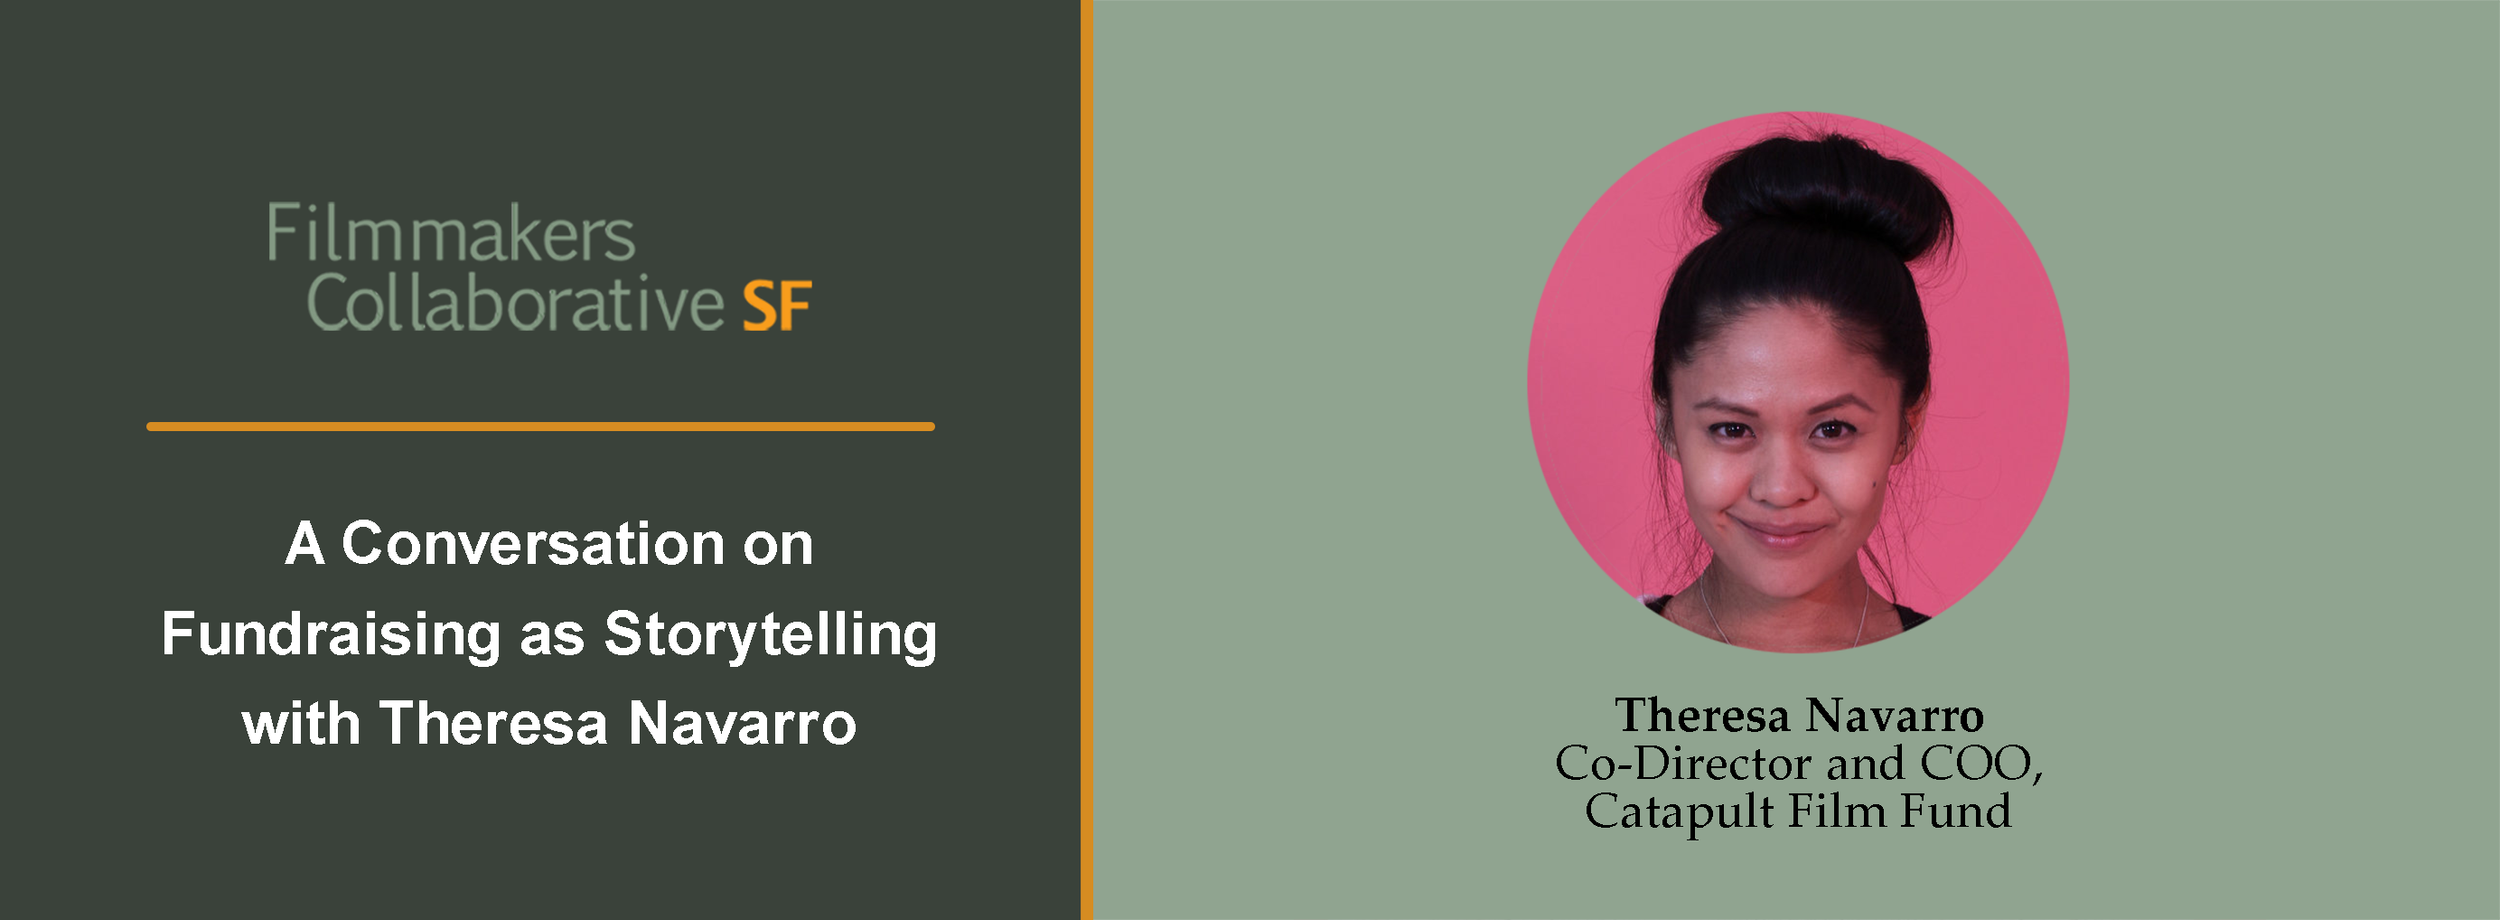 A Conversation on Fundraising as Storytelling with Theresa Navarro